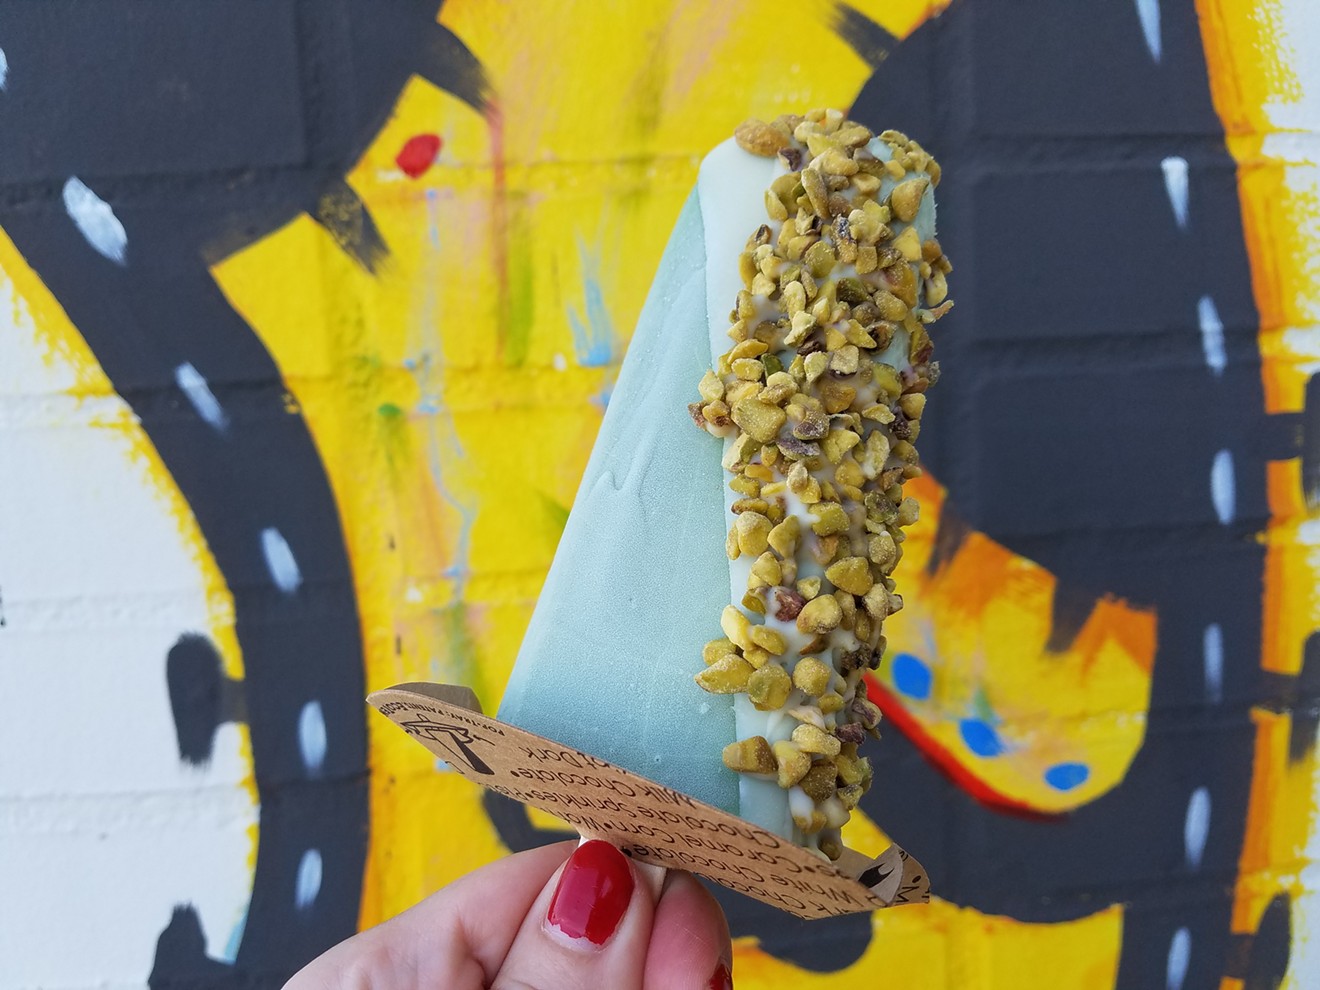 Popbar's pistachio on pistachio is like gelato with a stick up its ass. In a good way.